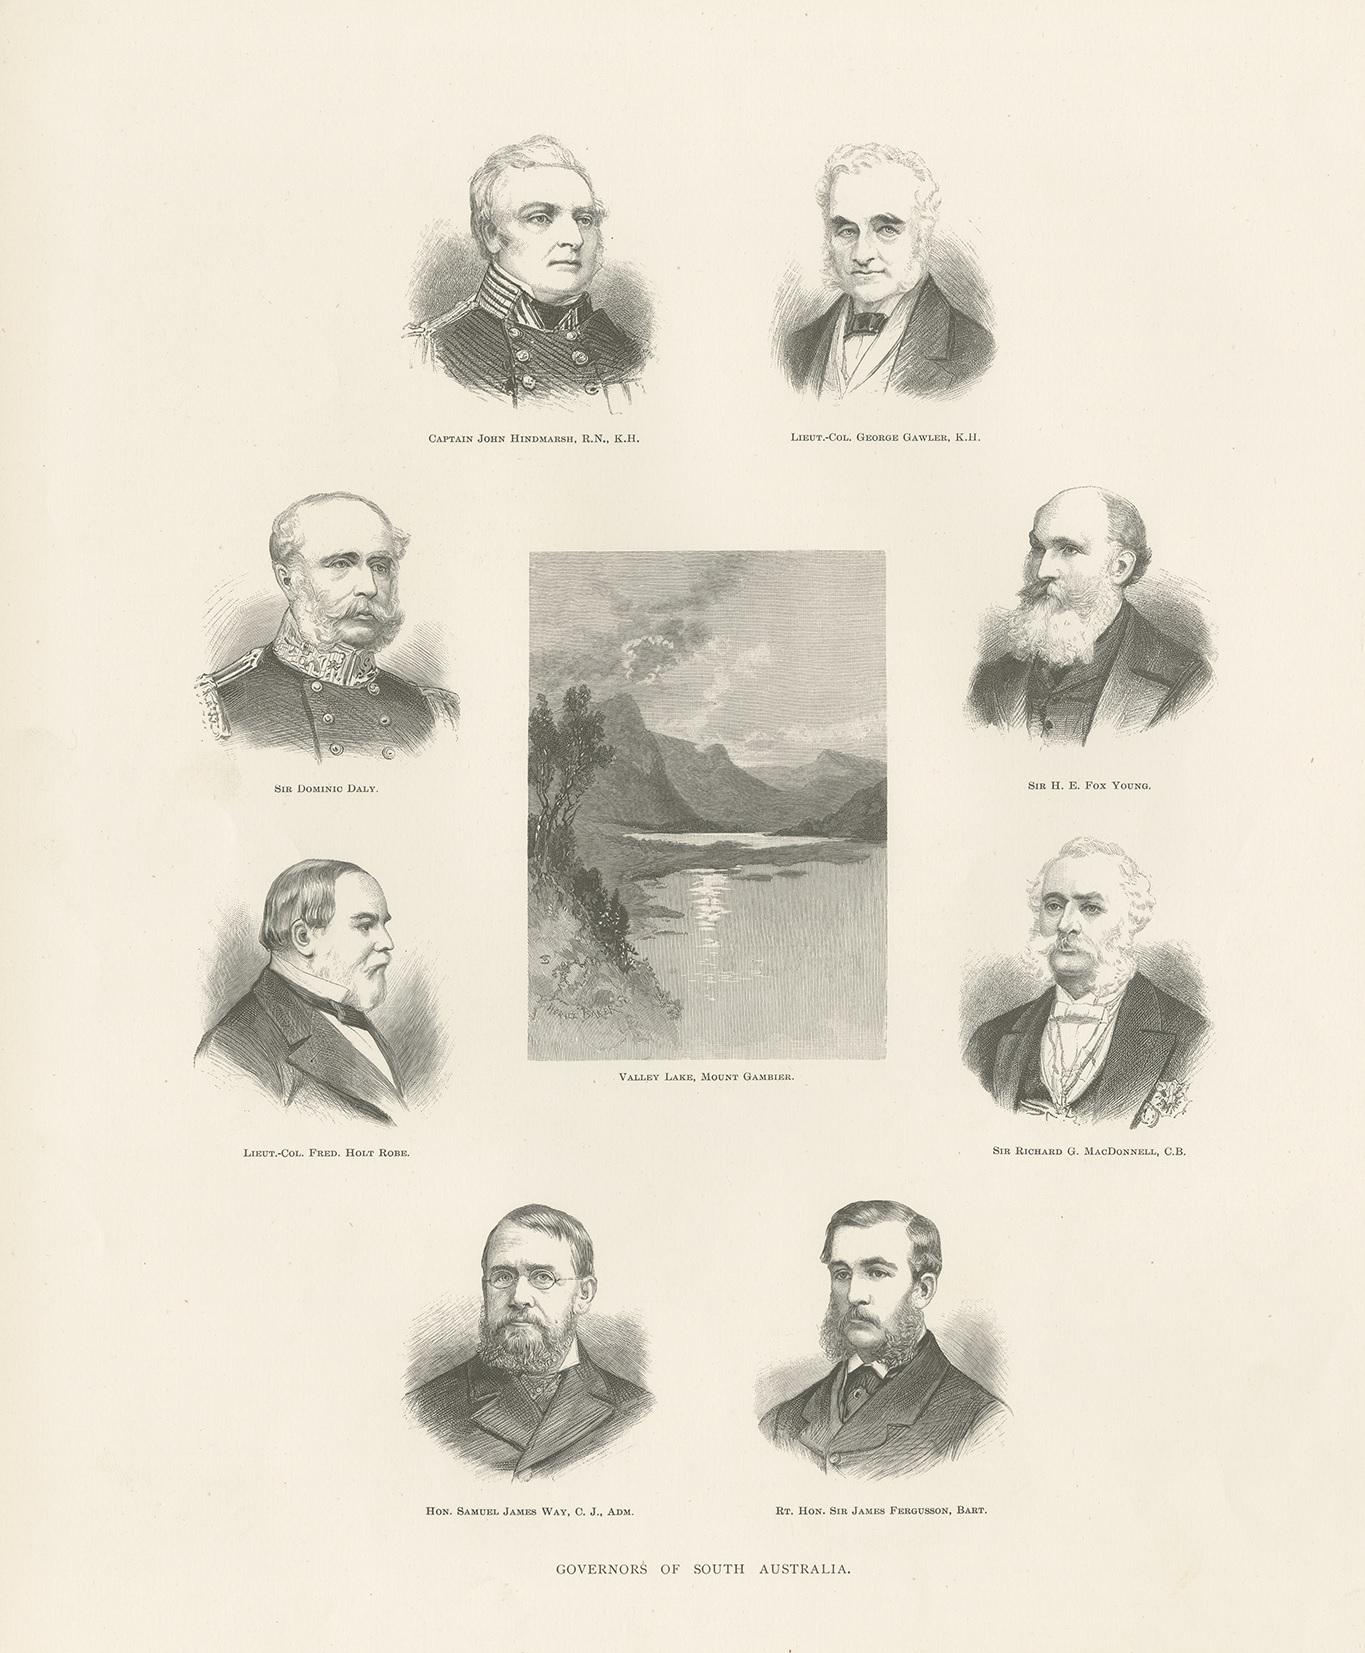 Antique print titled 'Governors of South Australia'. Shows; Captain John Hindmarsh. R.N., K.H; Lieut.-Col George Gawler, K.H; Sir Dominic Daly; Sir H.E. Fox Young; Lieut.-Col. Fred. Holt Robe; Sir Richard G. MacDonnell, C.B; Valley Lake, Mount